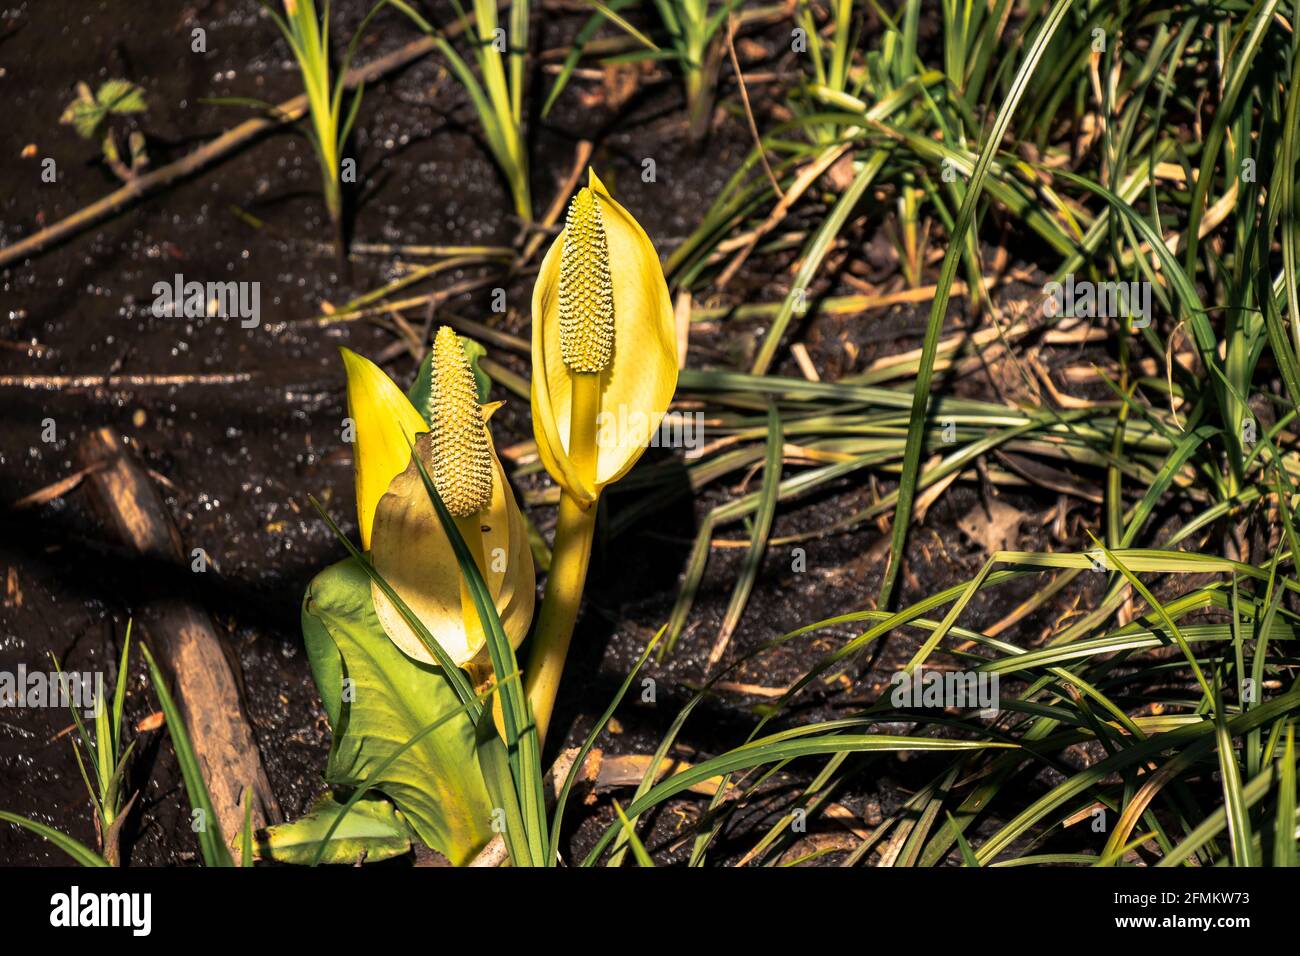 Lysichiton americanus, also called western skunk cabbage, yellow skunk cabbage or swamp lantern found in a small pond in Courtenay, Canada Stock Photo